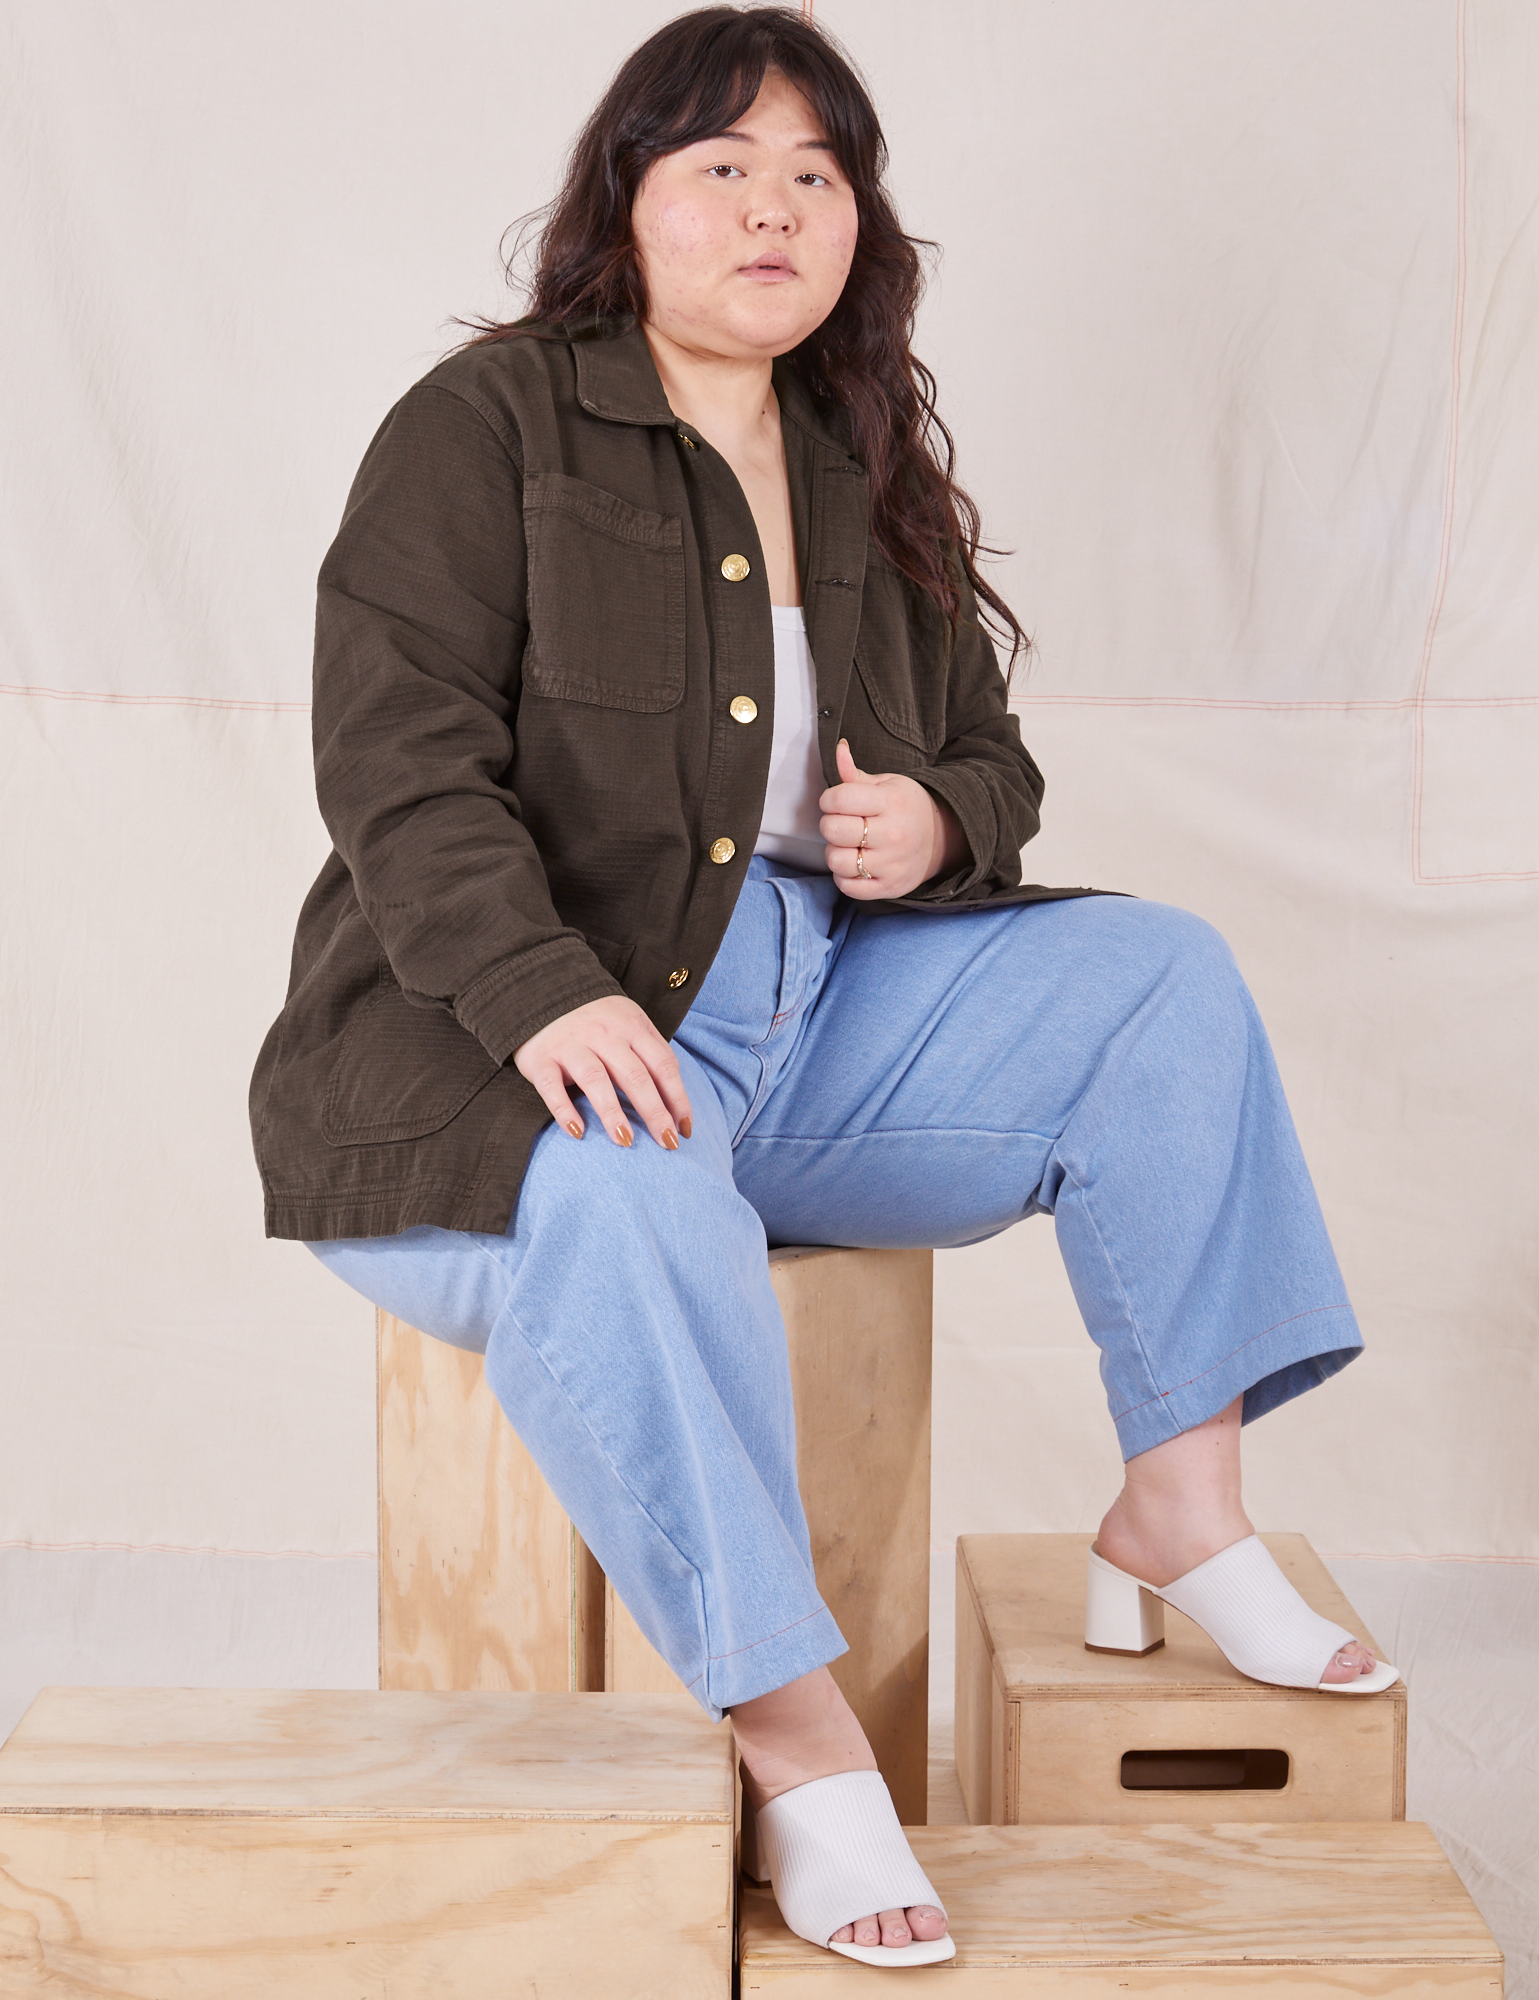 Ashley is wearing Field Coat in Espresso Brown and light wash Trouser Jeans